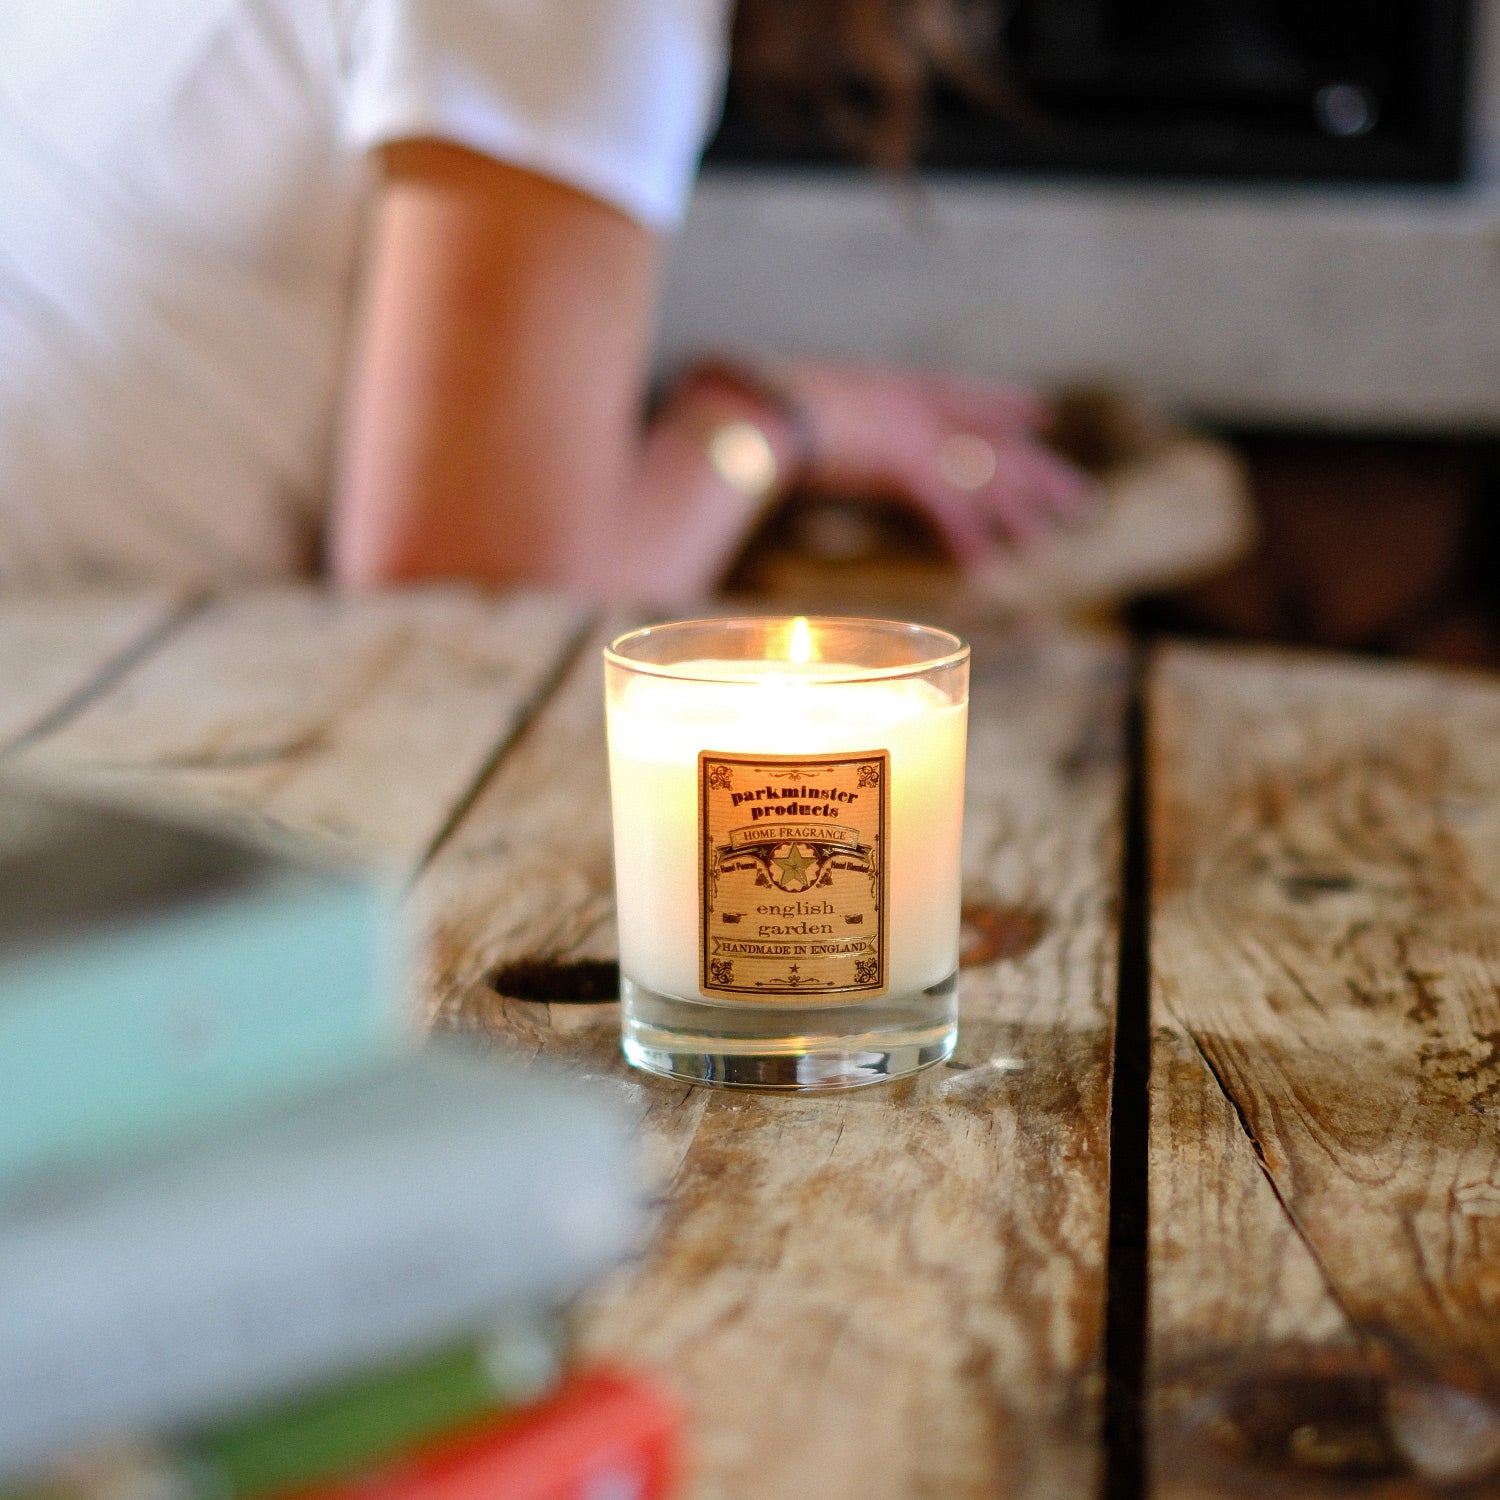 Parkminster's handcrafted large votive soy wax candles in the exclusive English Garden fragrance, carefully made in our Cornwall workshop by skilled craftspeople